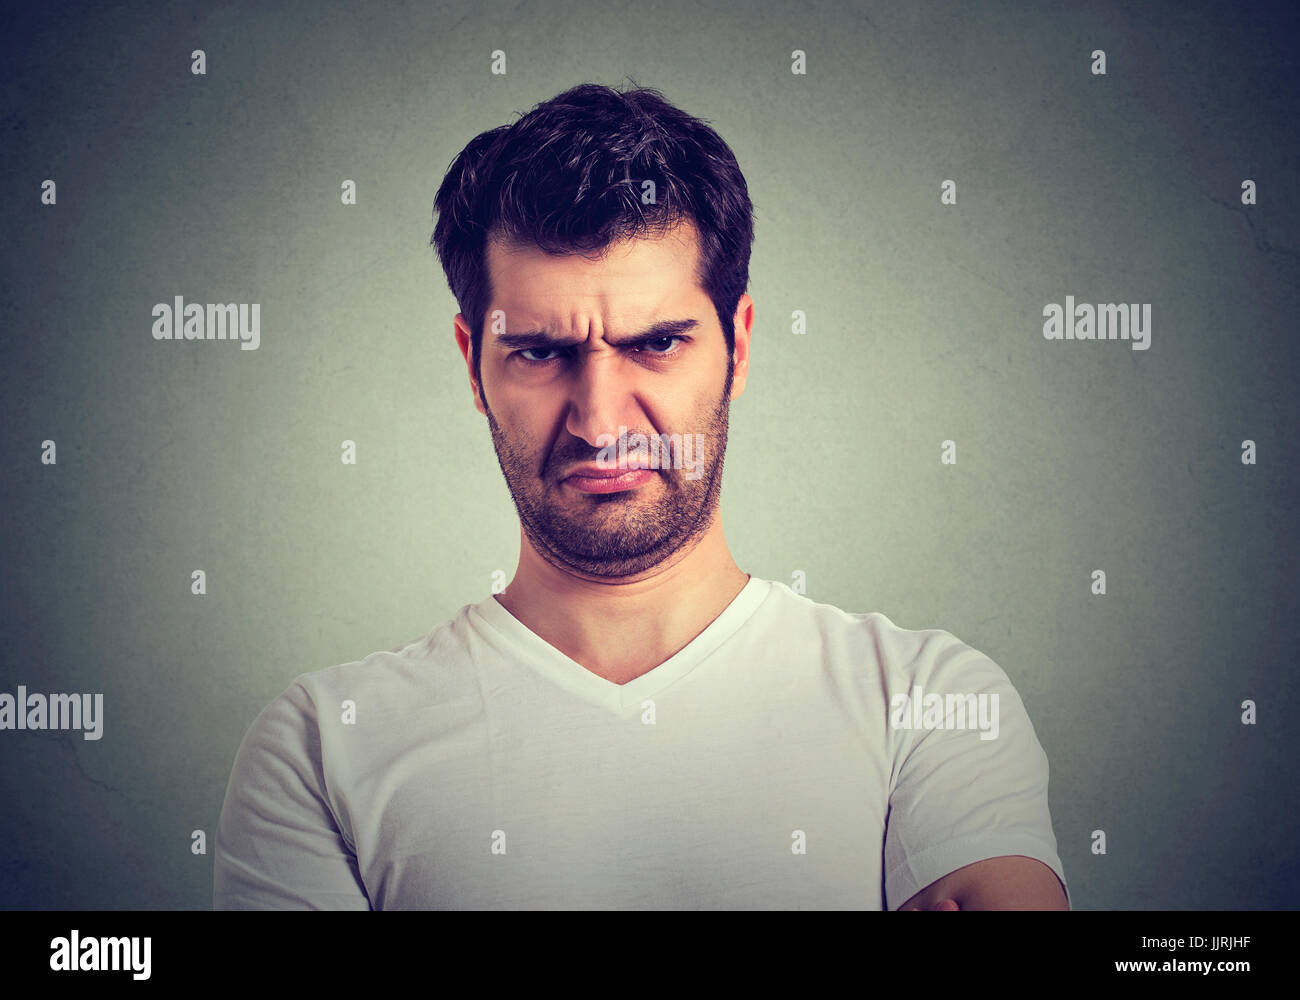 portrait of a disgusted young man Stock Photo